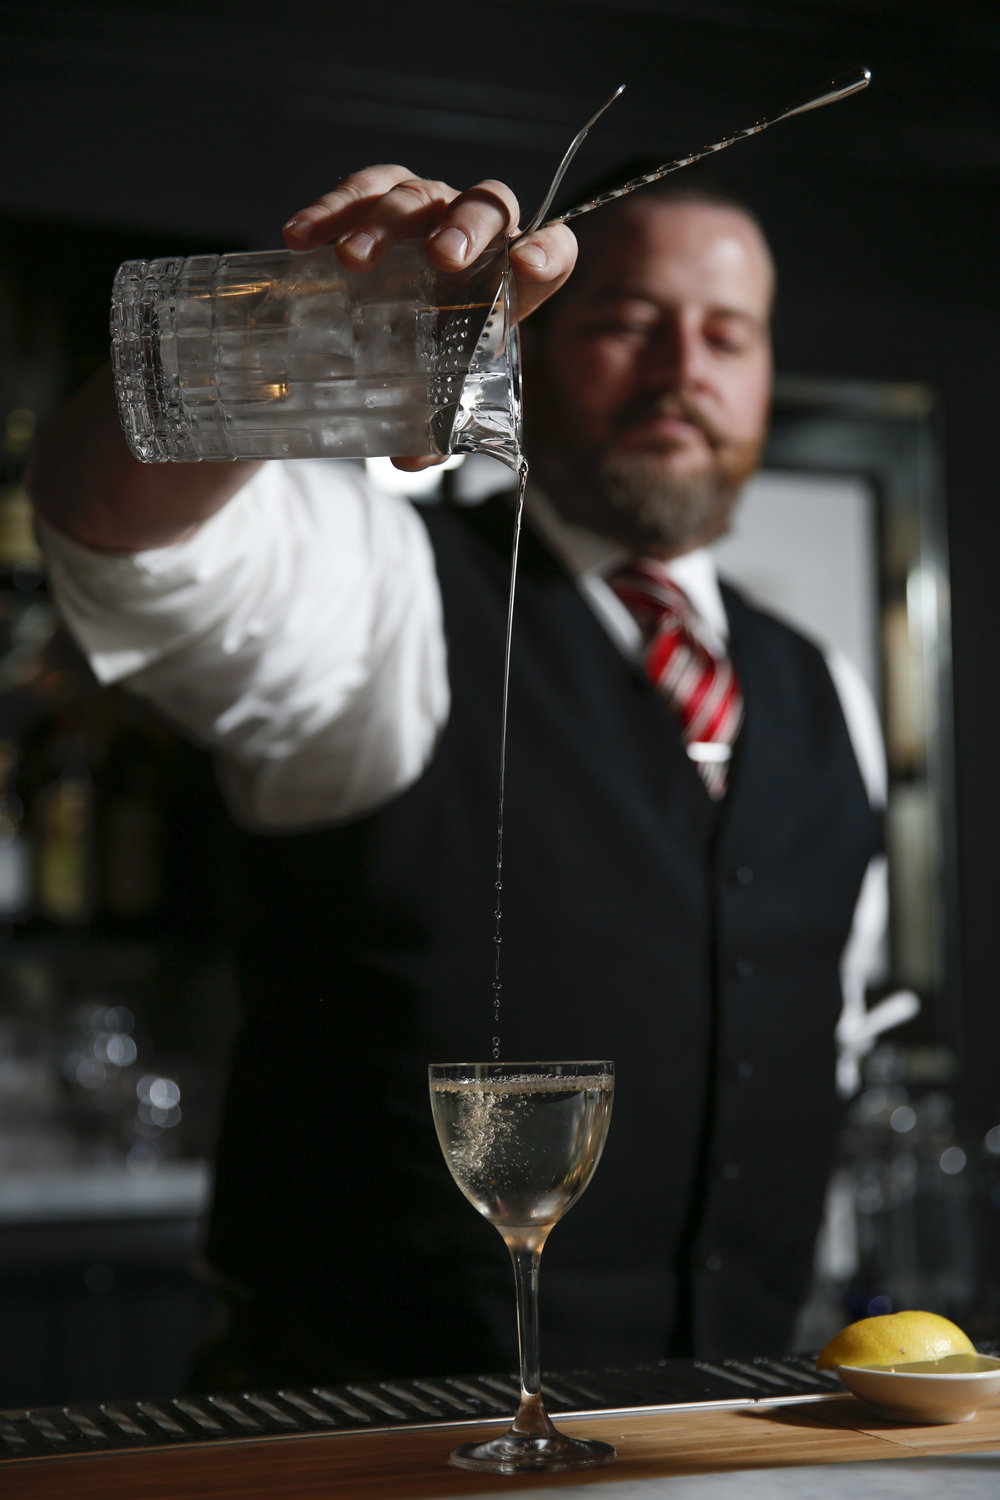  Brandon Clements bartender with Saratoga, an American restaurant with a full bar, makes a drink. The restaurant opens next week located at 1000 Larkin Street in San Francisco, Calif. on Thursday, November 3, 2016.    